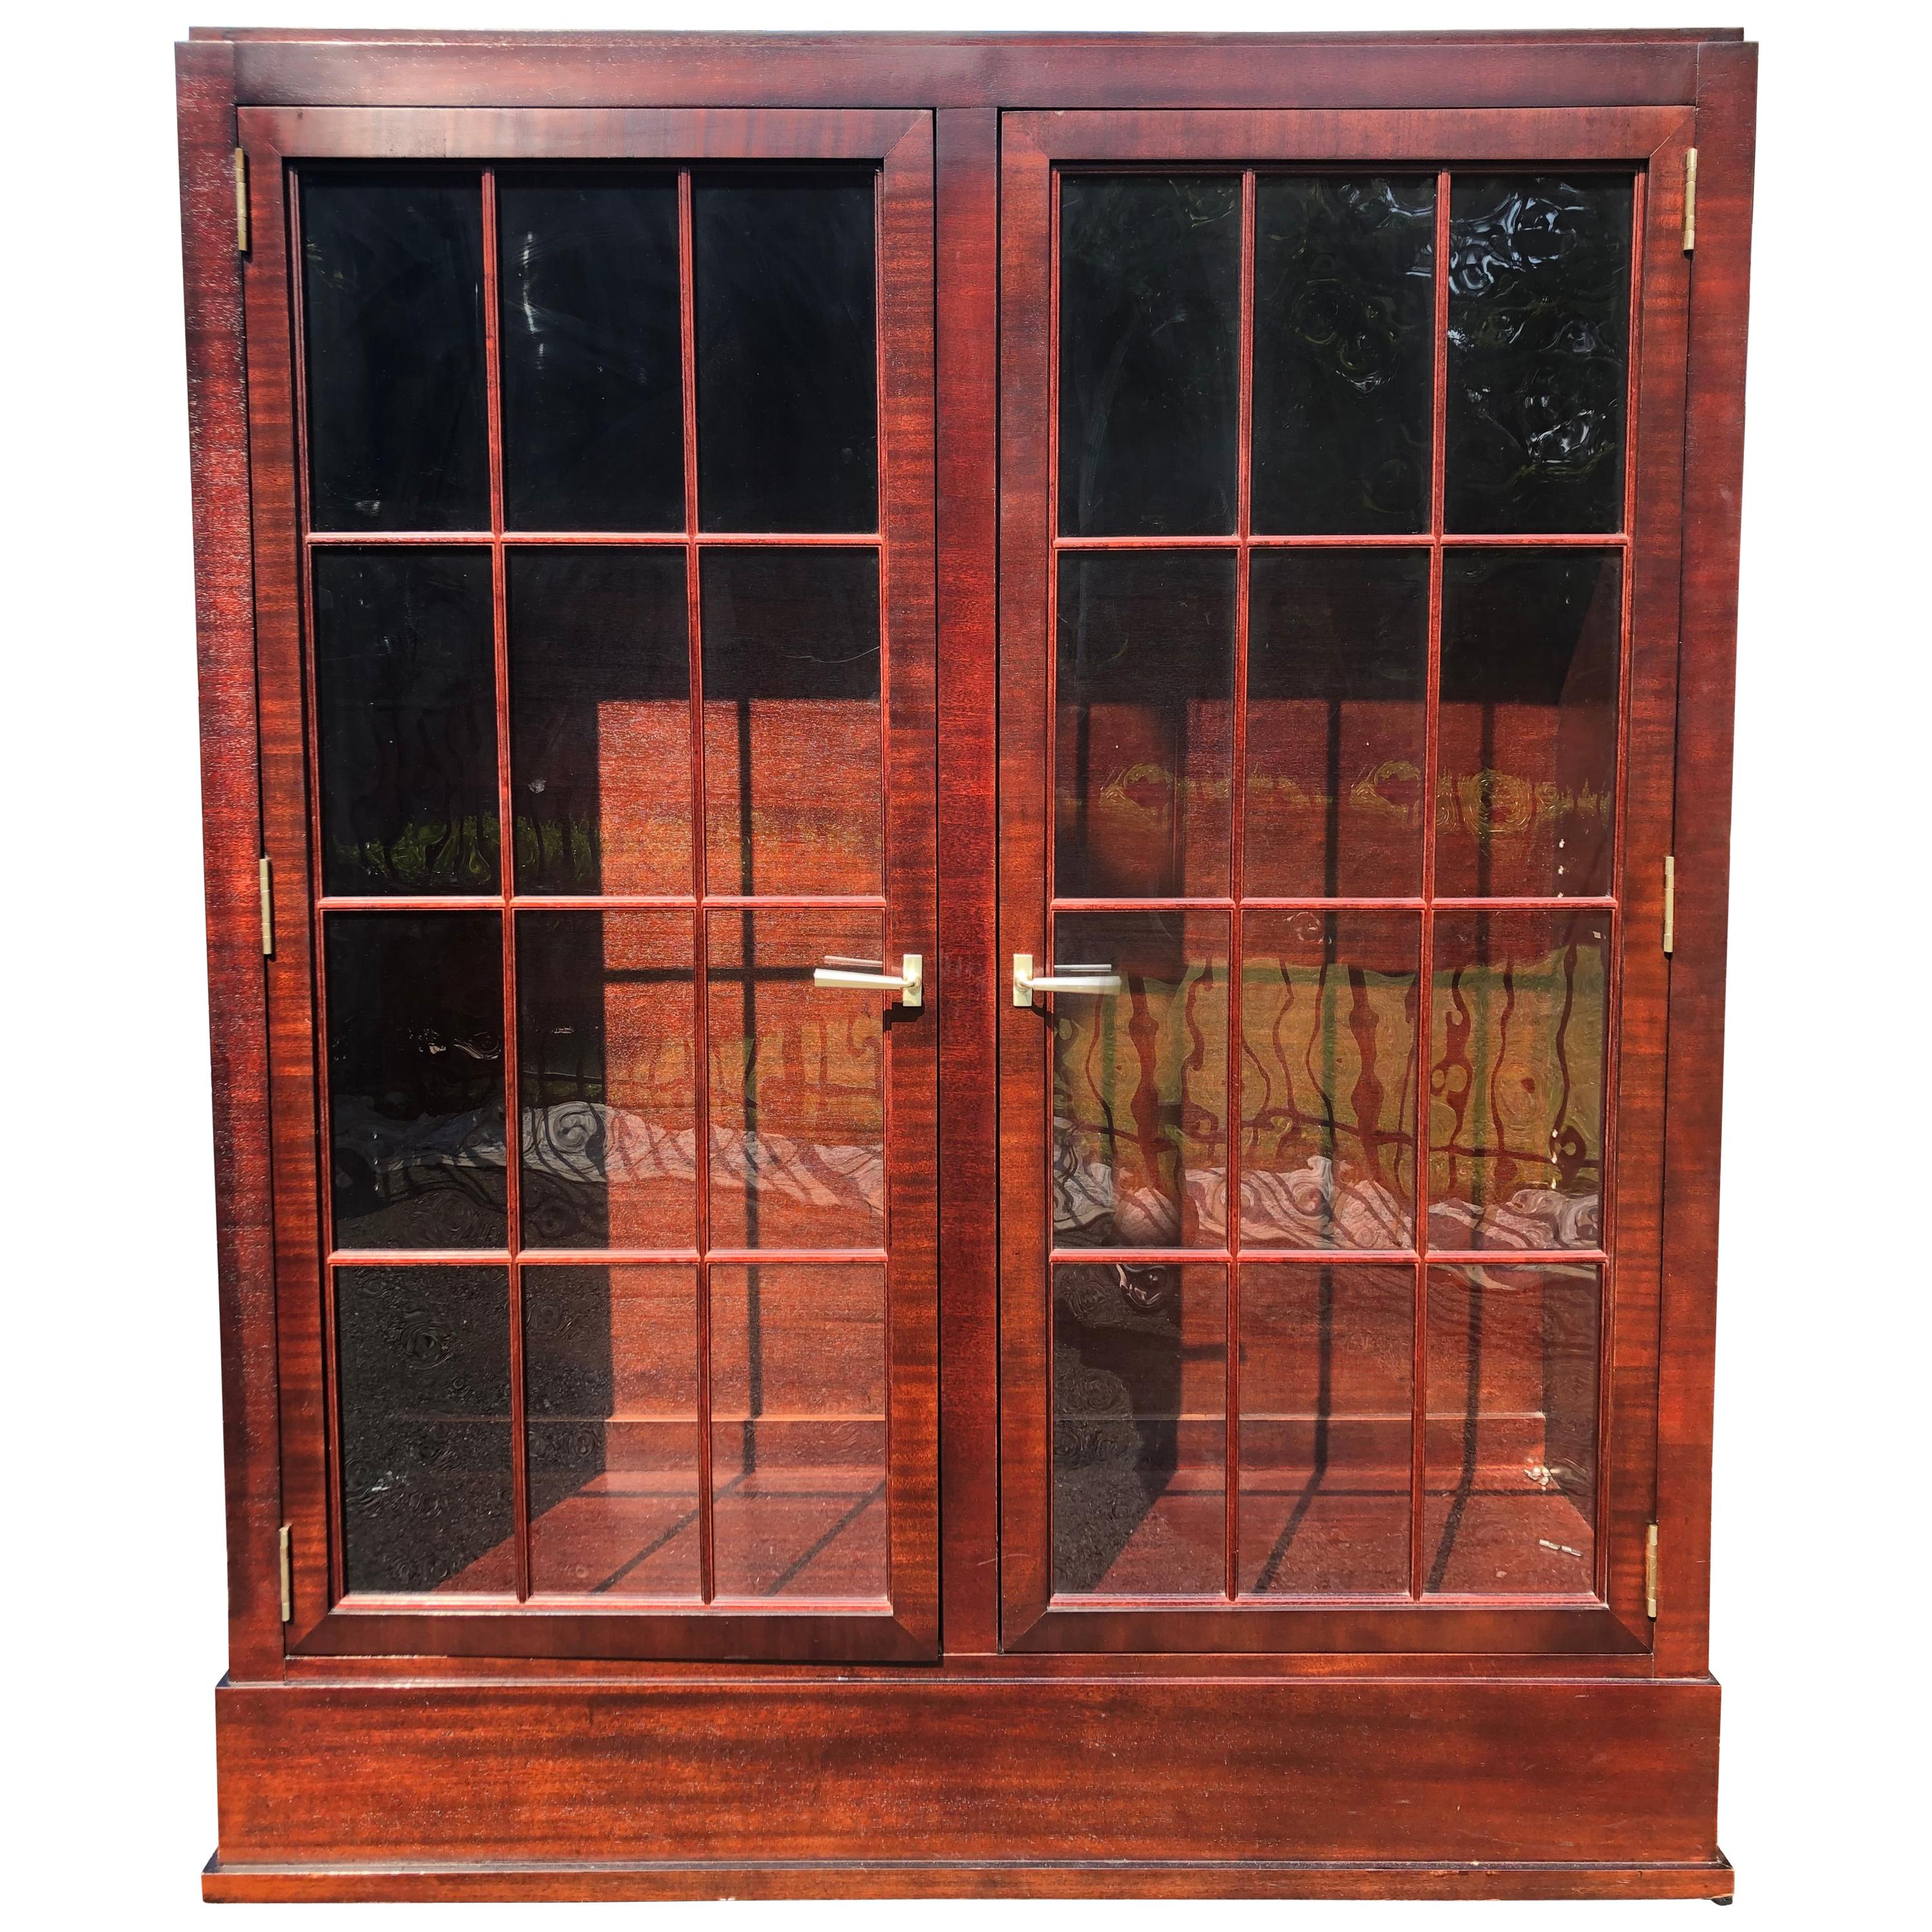 Very Rich Custom Mahogany Cabinet with Glass Doors and Adjustable Shelves